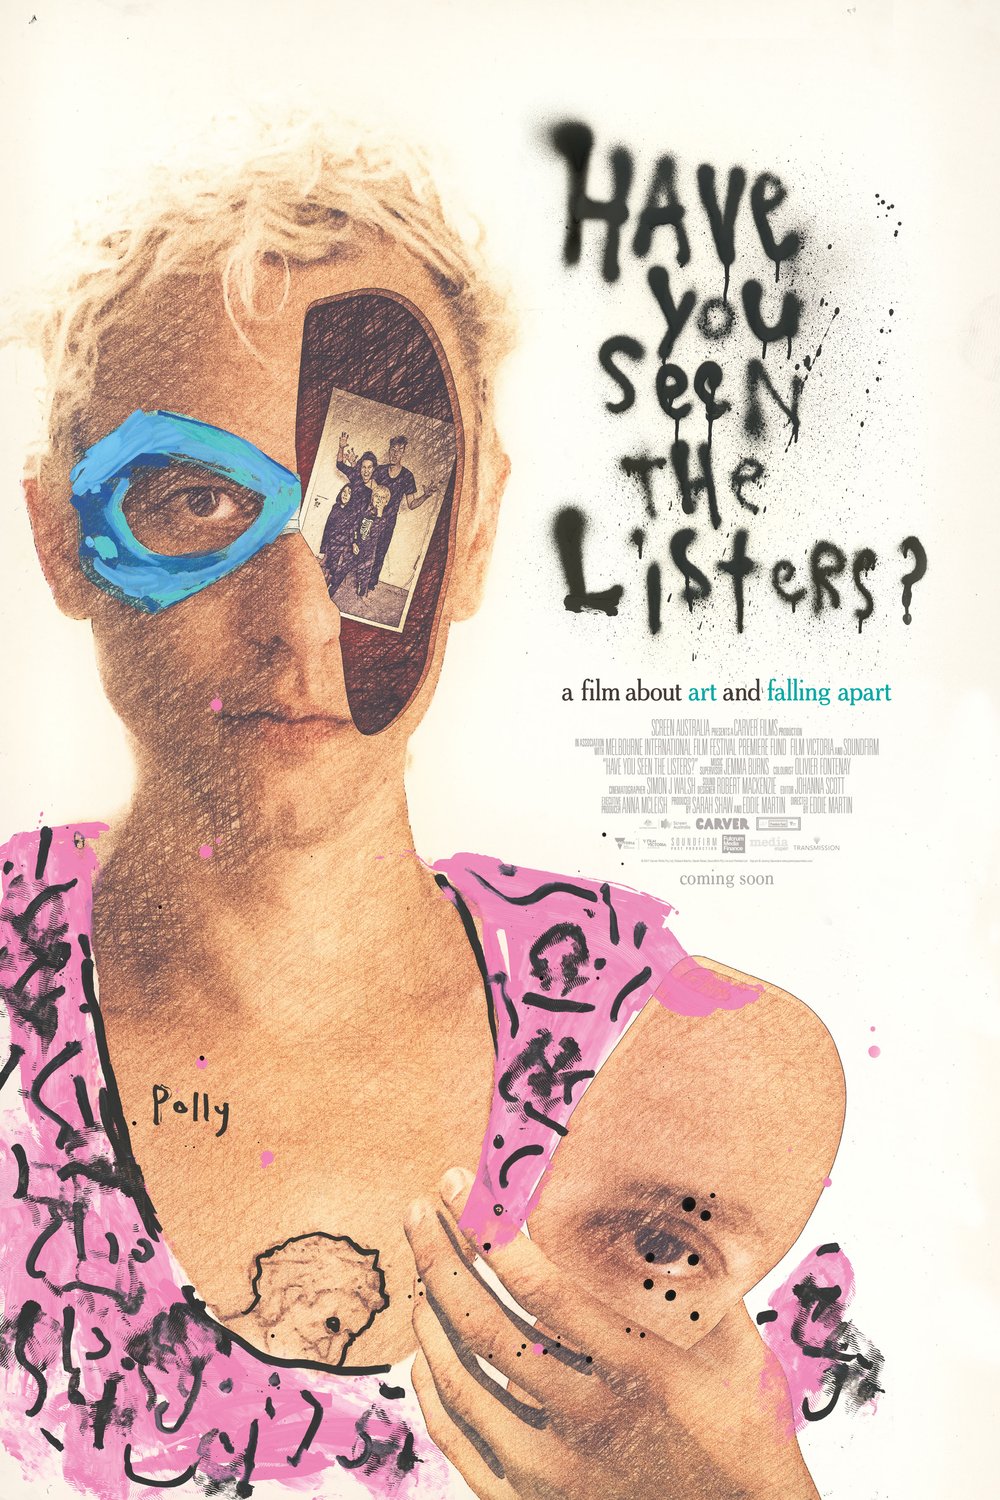 Poster of the movie Have You Seen the Listers?